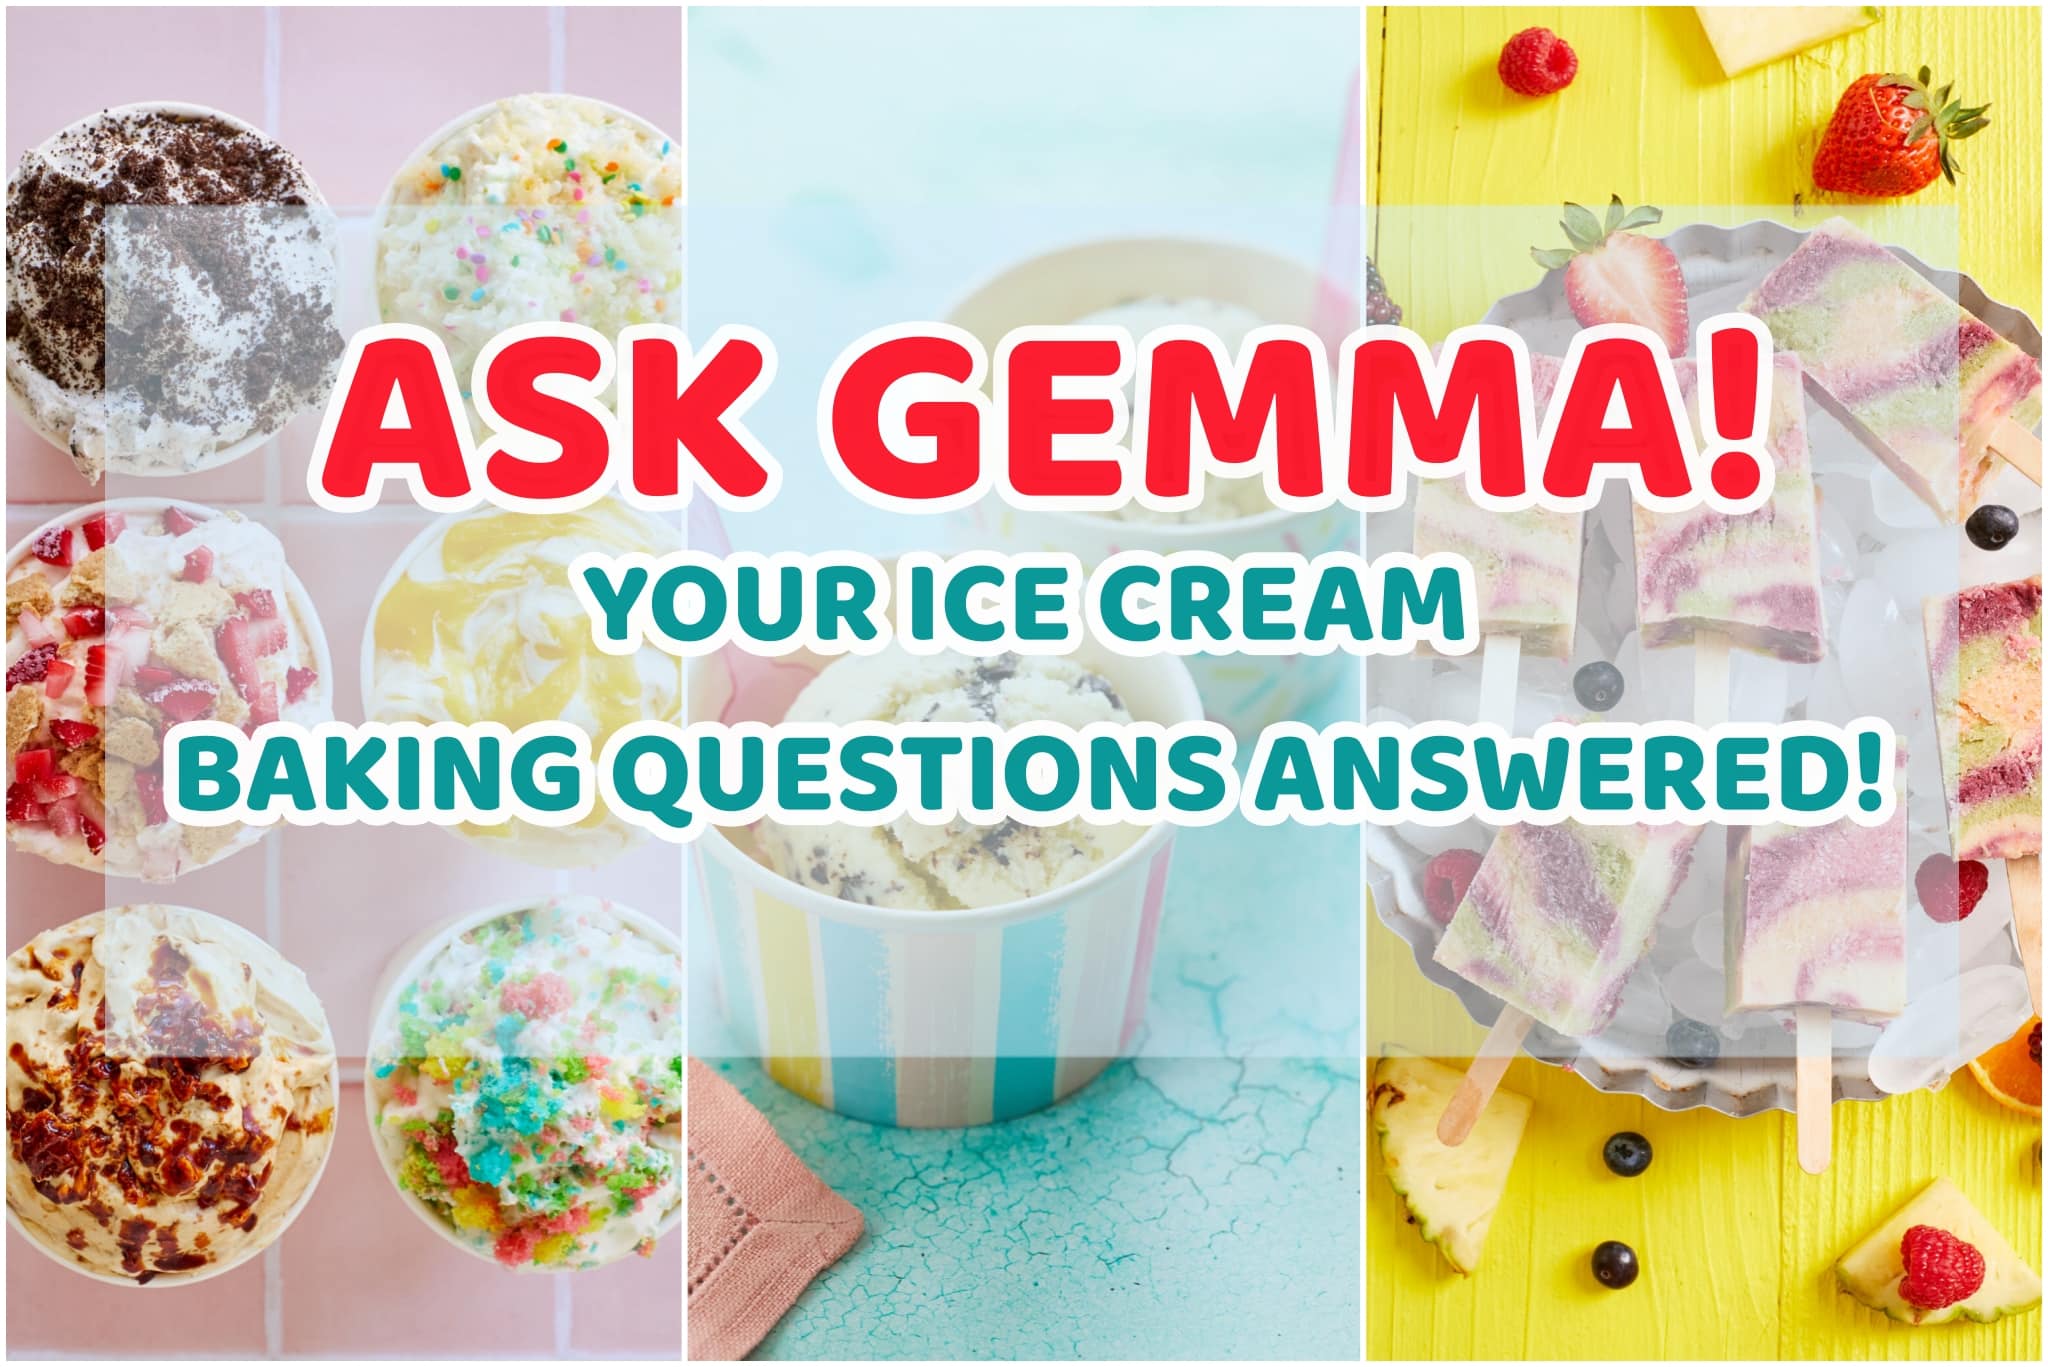 ASK GEMMA! YOUR ICE CREAM BAKING QUESTIONS ANSWERED! ICE CREAM Q&A